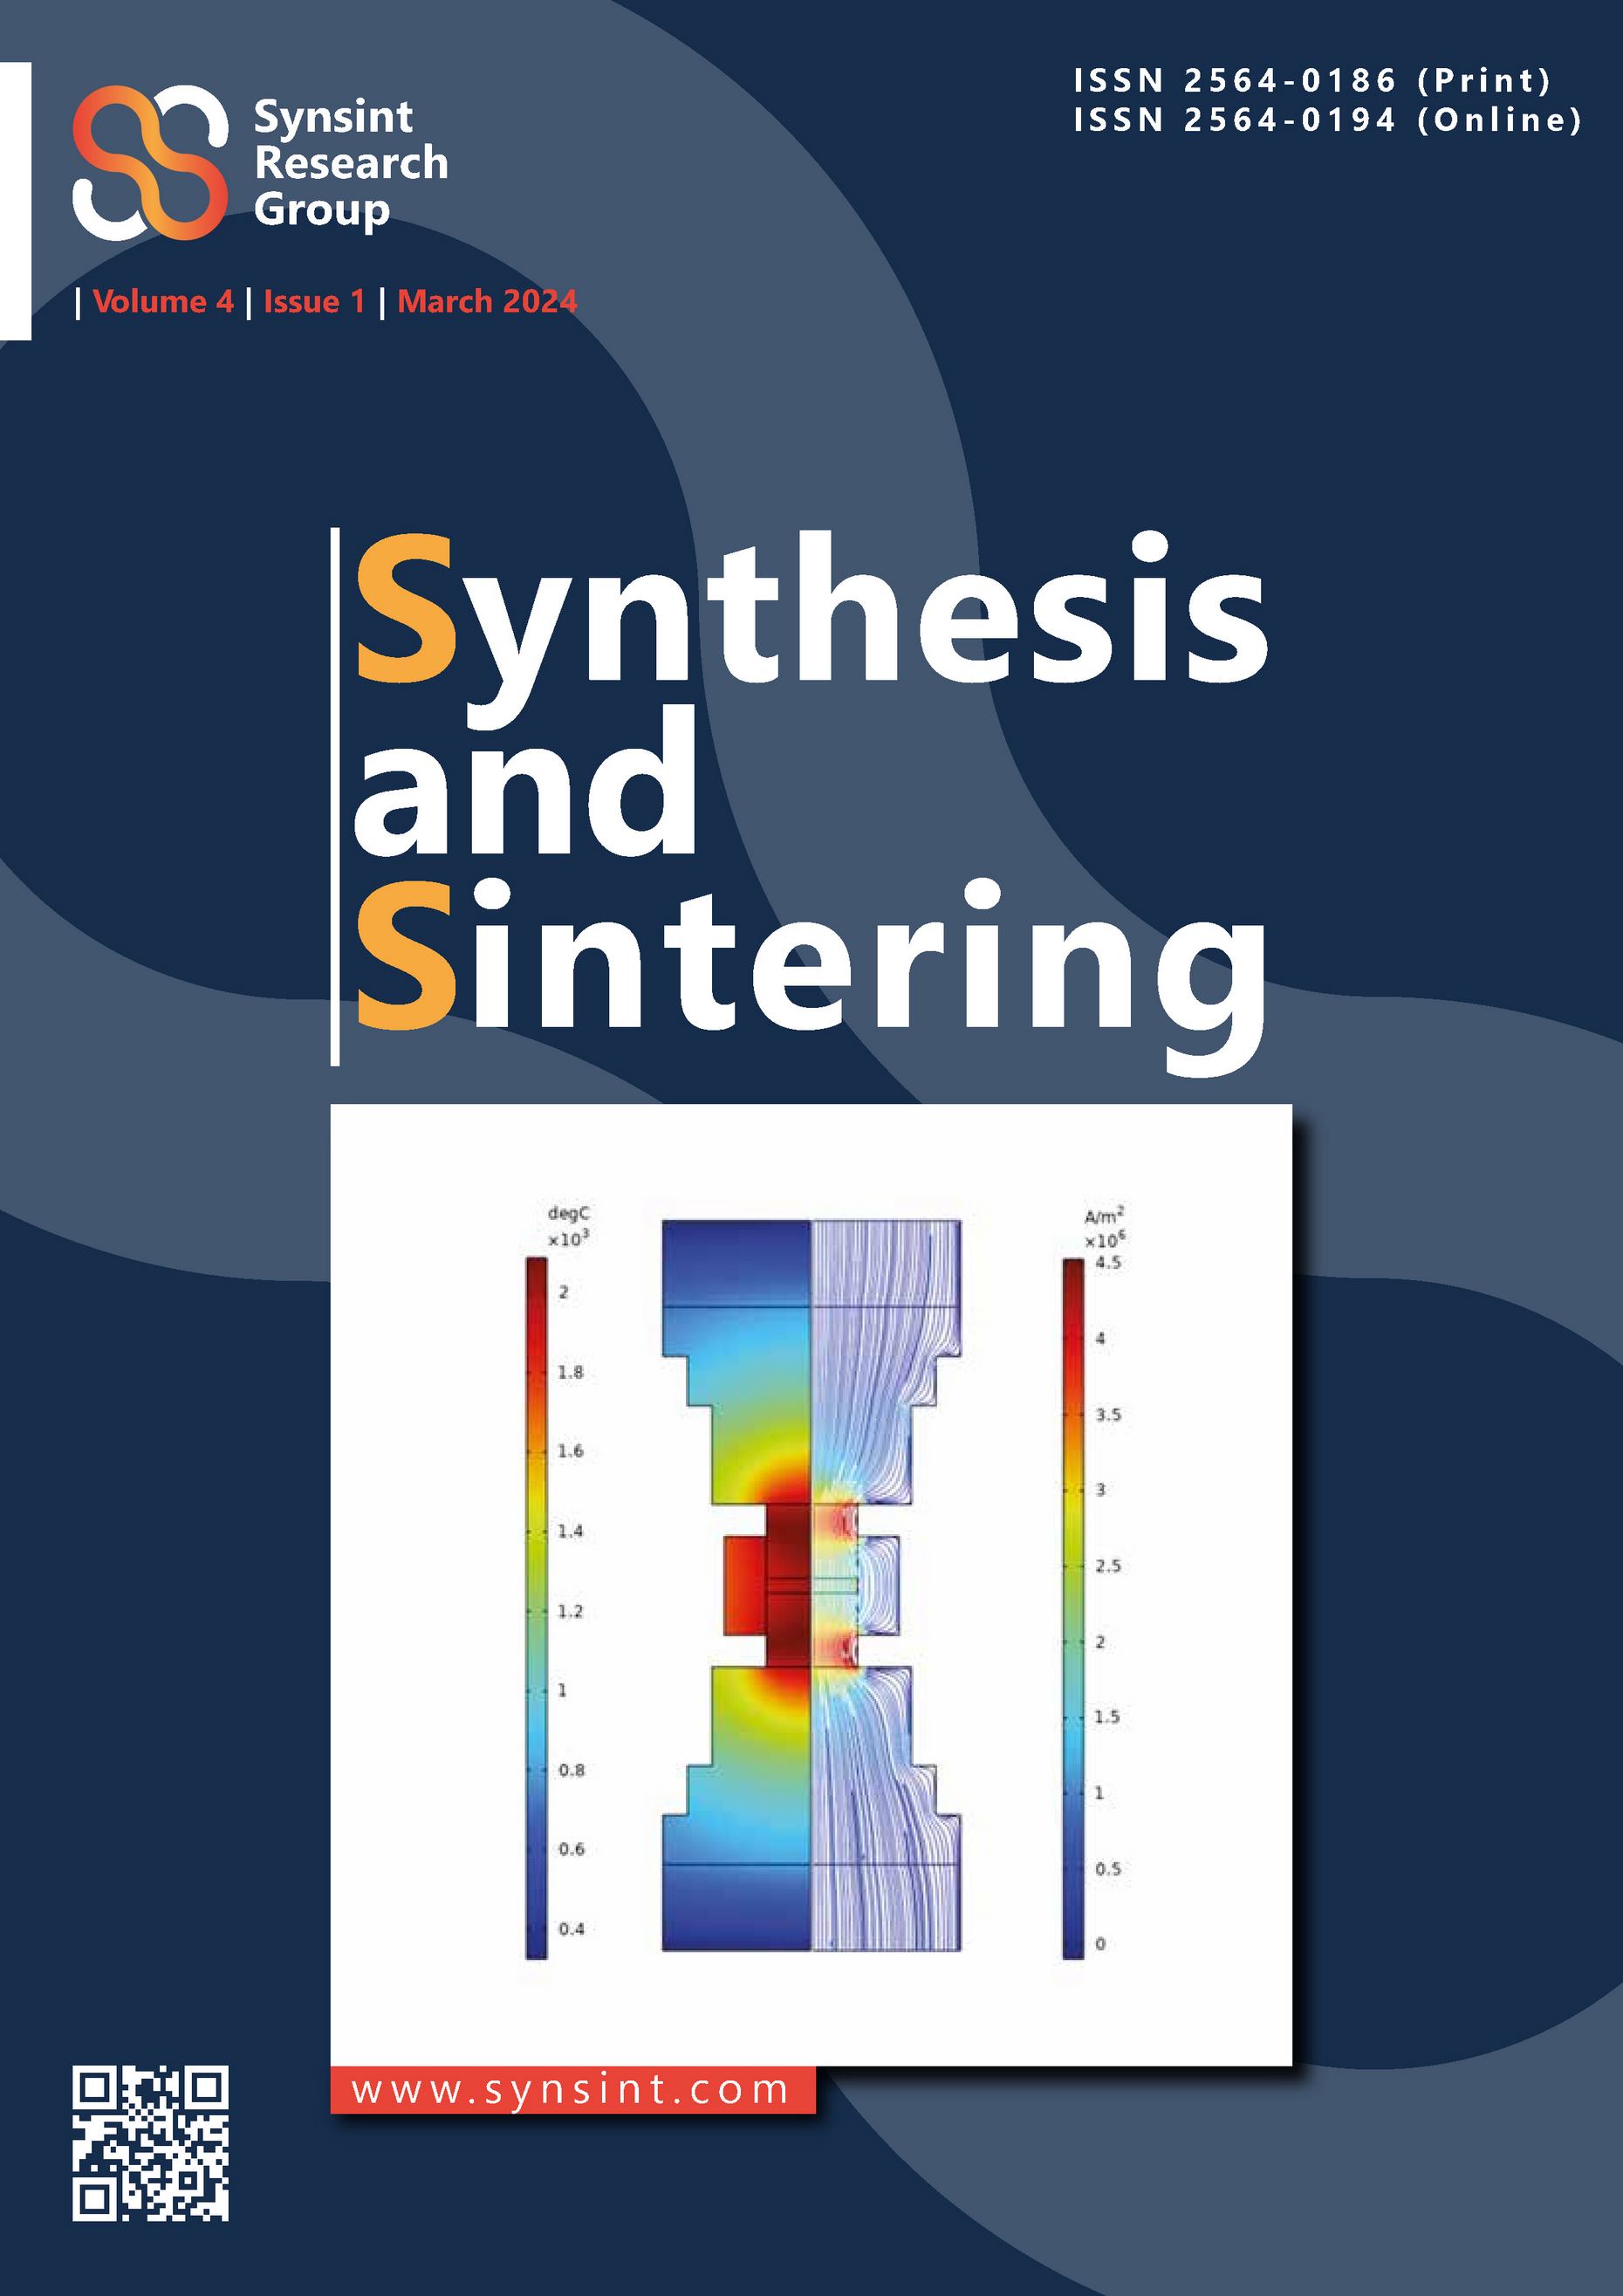 Synthesis and Sintering Vol. 4 No. 1 (2024)